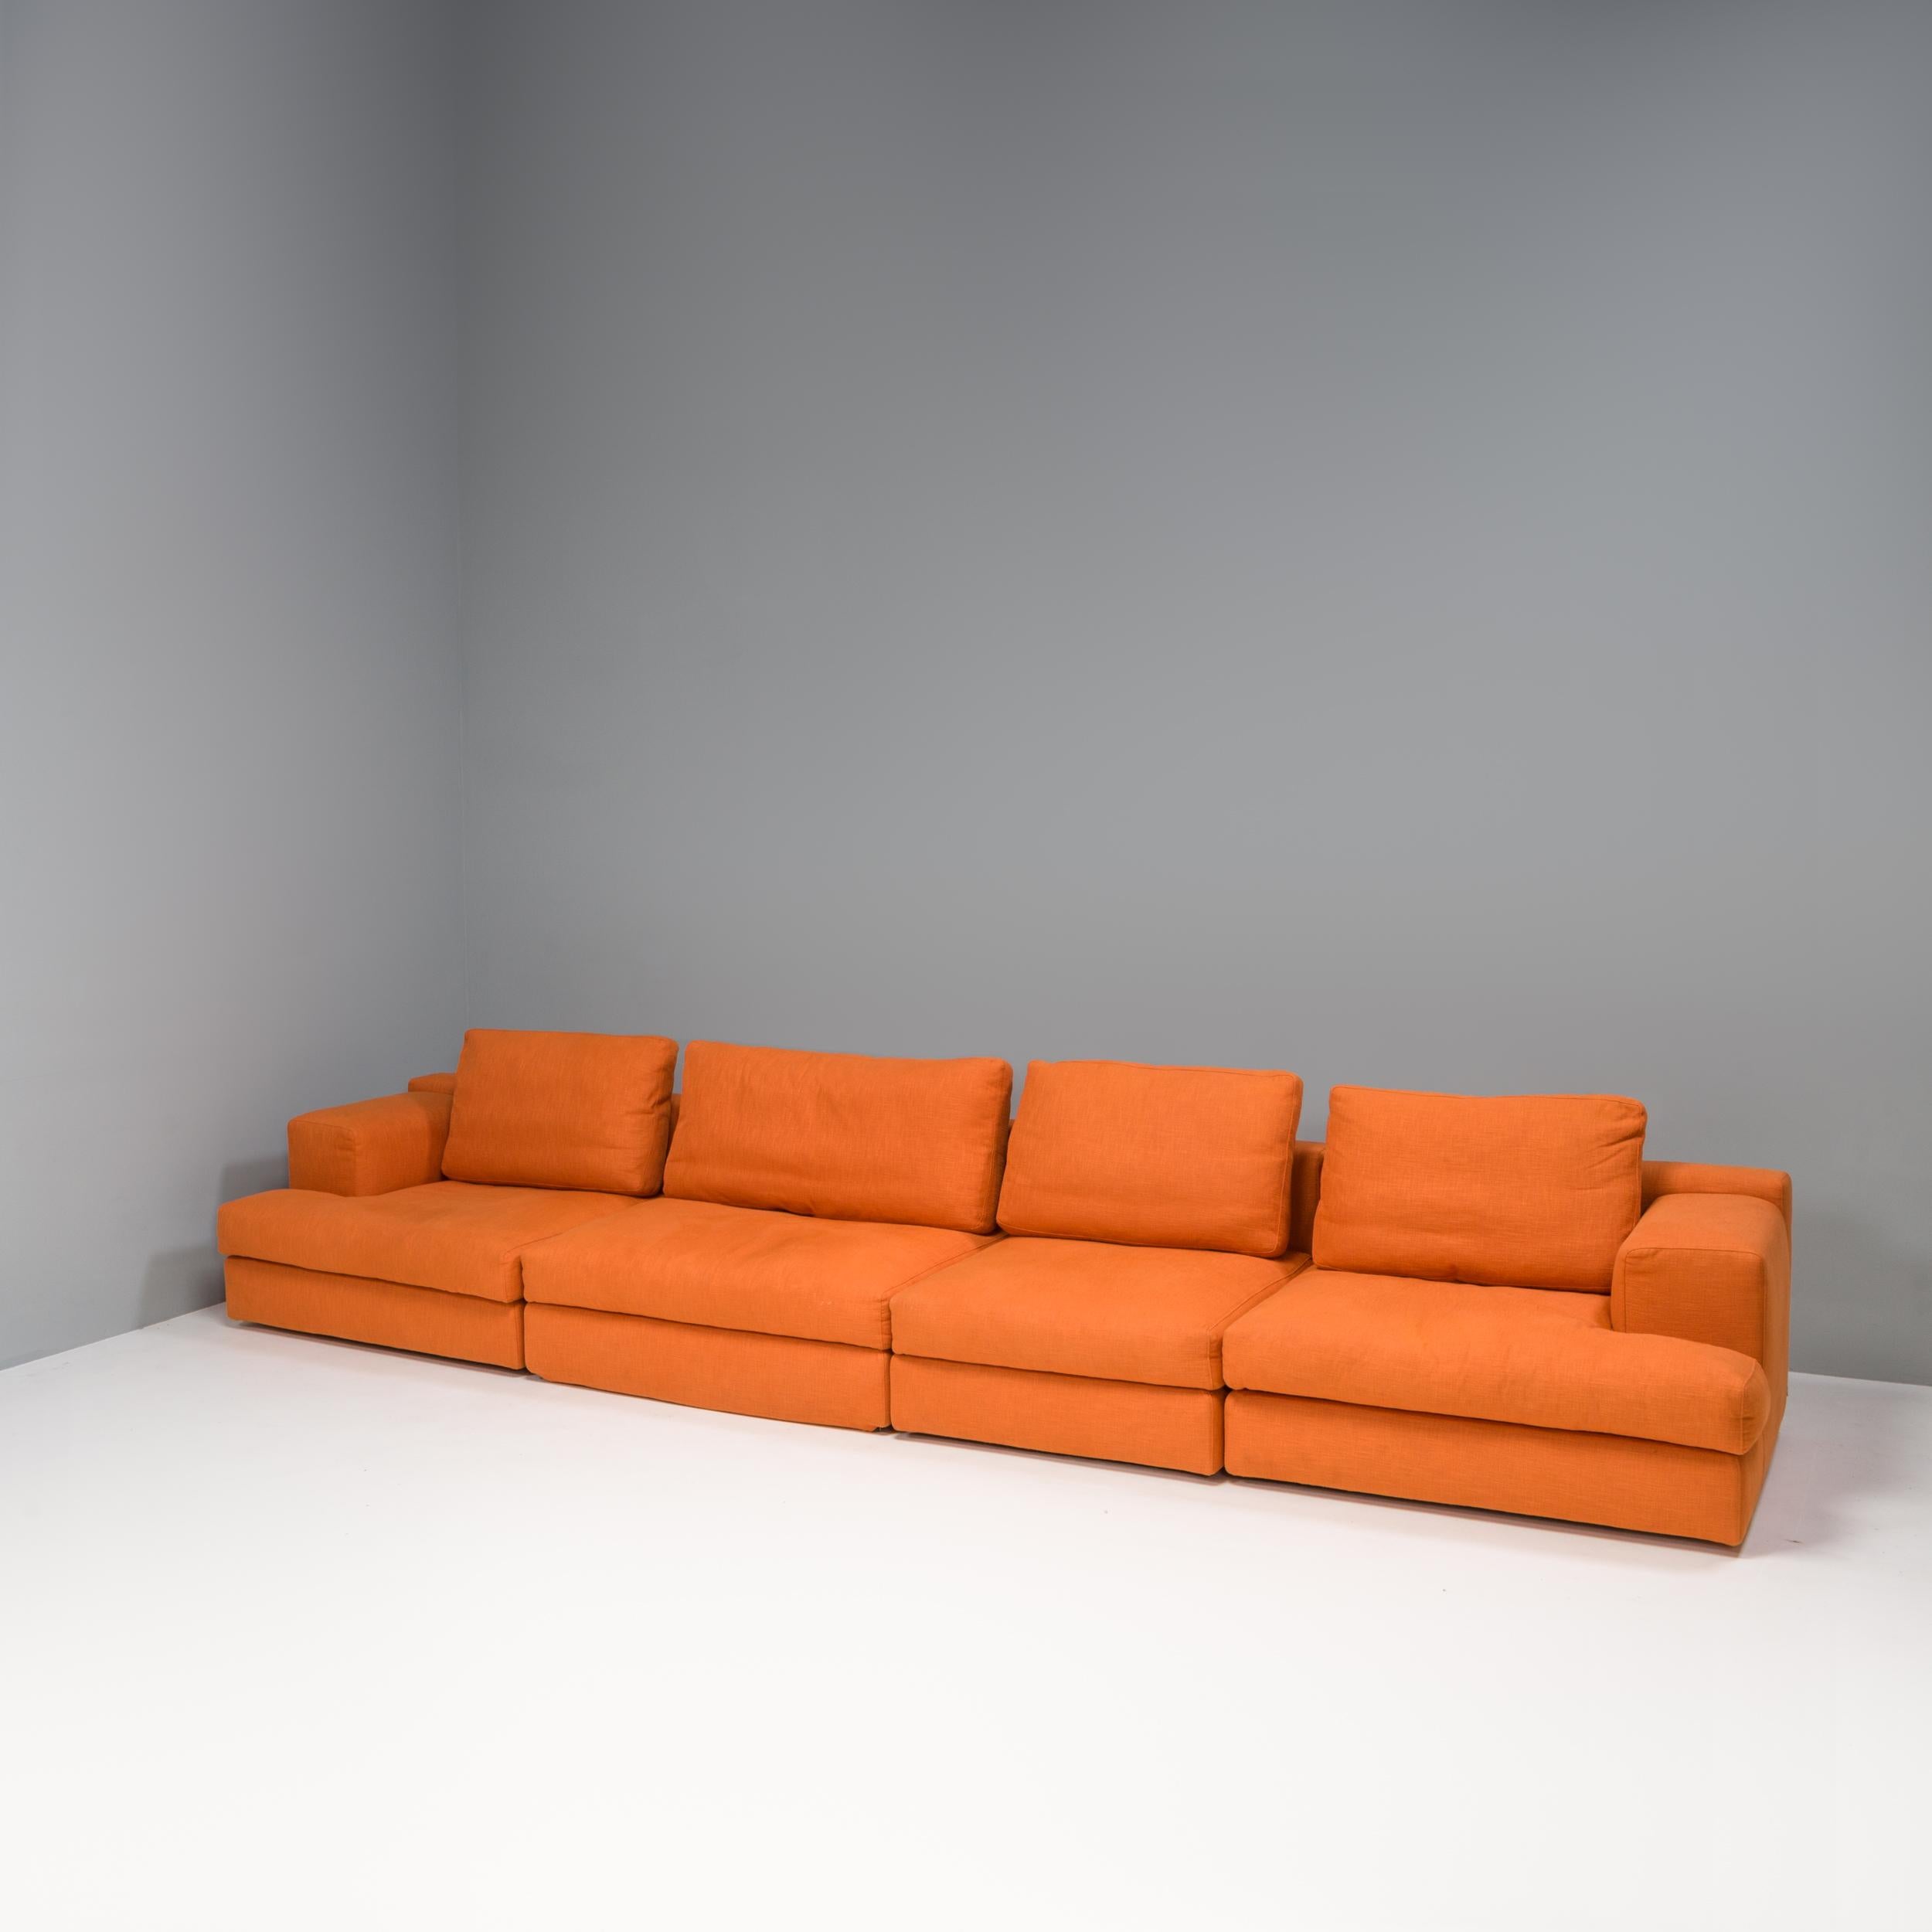 Originally designed by Piero Lissoni for Cassina in 2007, the Mex Cube sofa is a fantastic example of modern Italian design.

Comprising four separate units, the sofa is constructed from an internal steel frame with foam cushioning and is fully